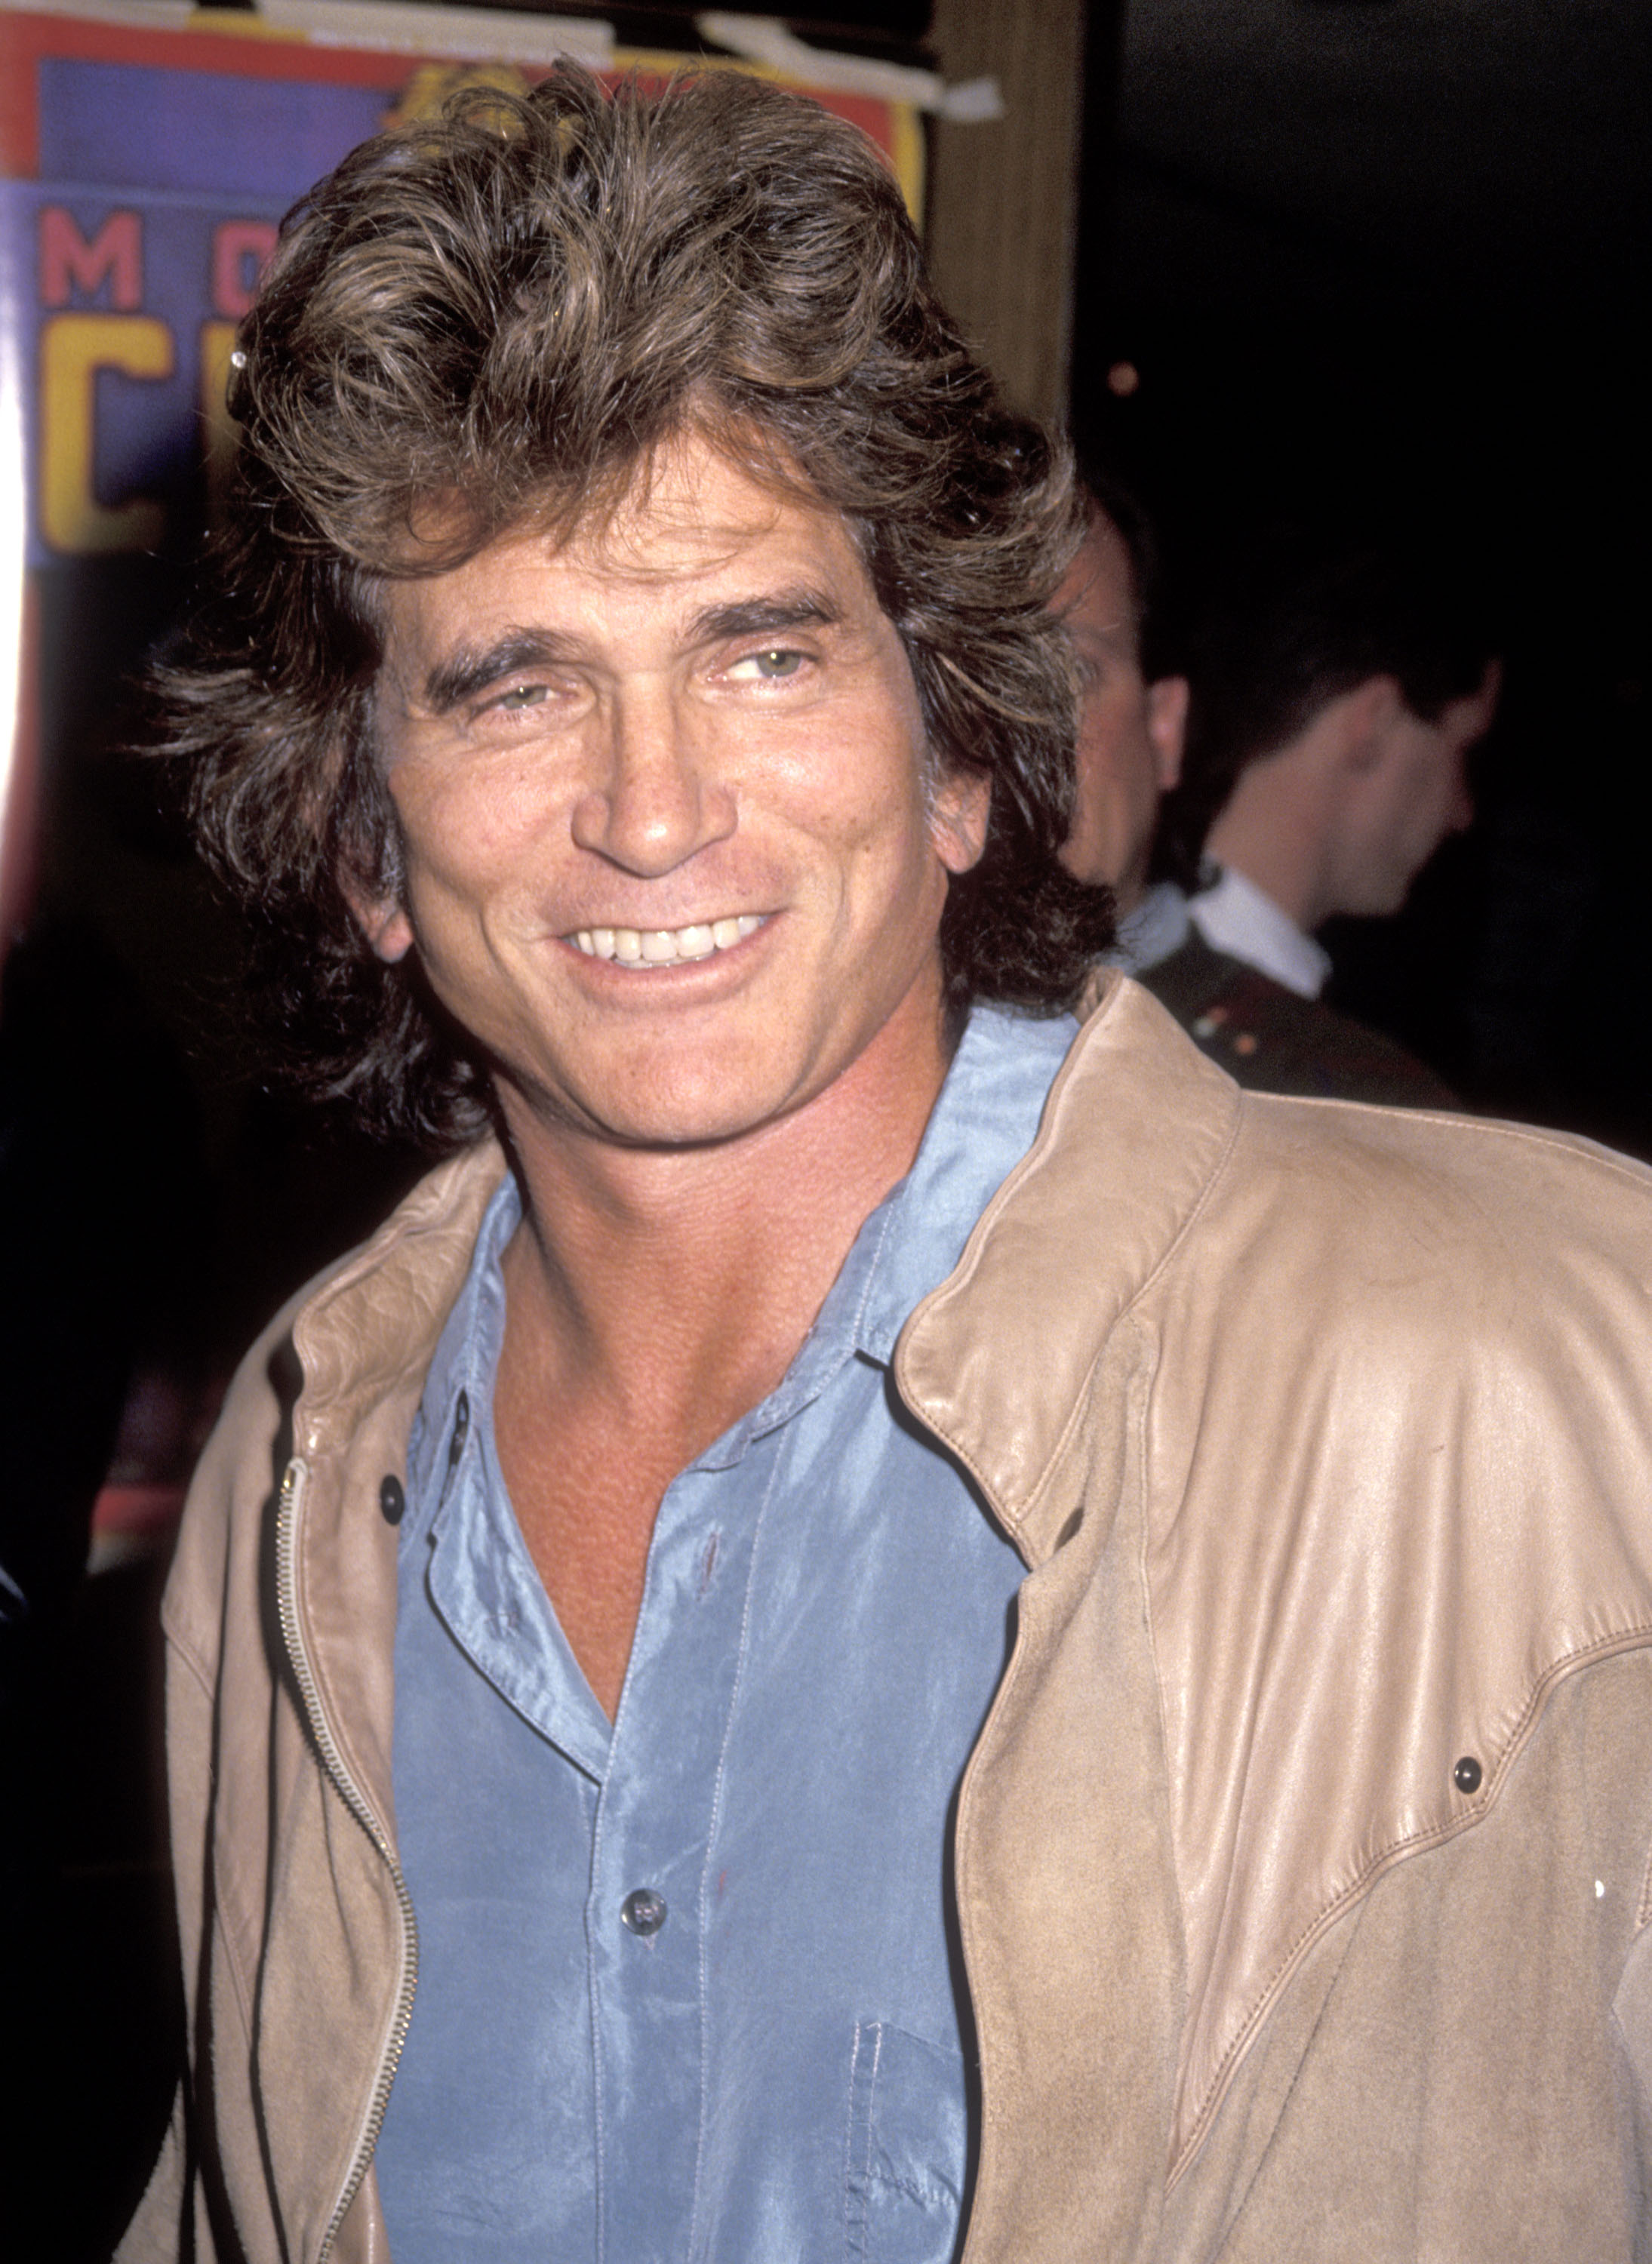 Michael Landon attends the Moscow Circus Opening Night Performance at the Great Western Forum on March 6, 1991 in Inglewood, California. | Source: Getty Images